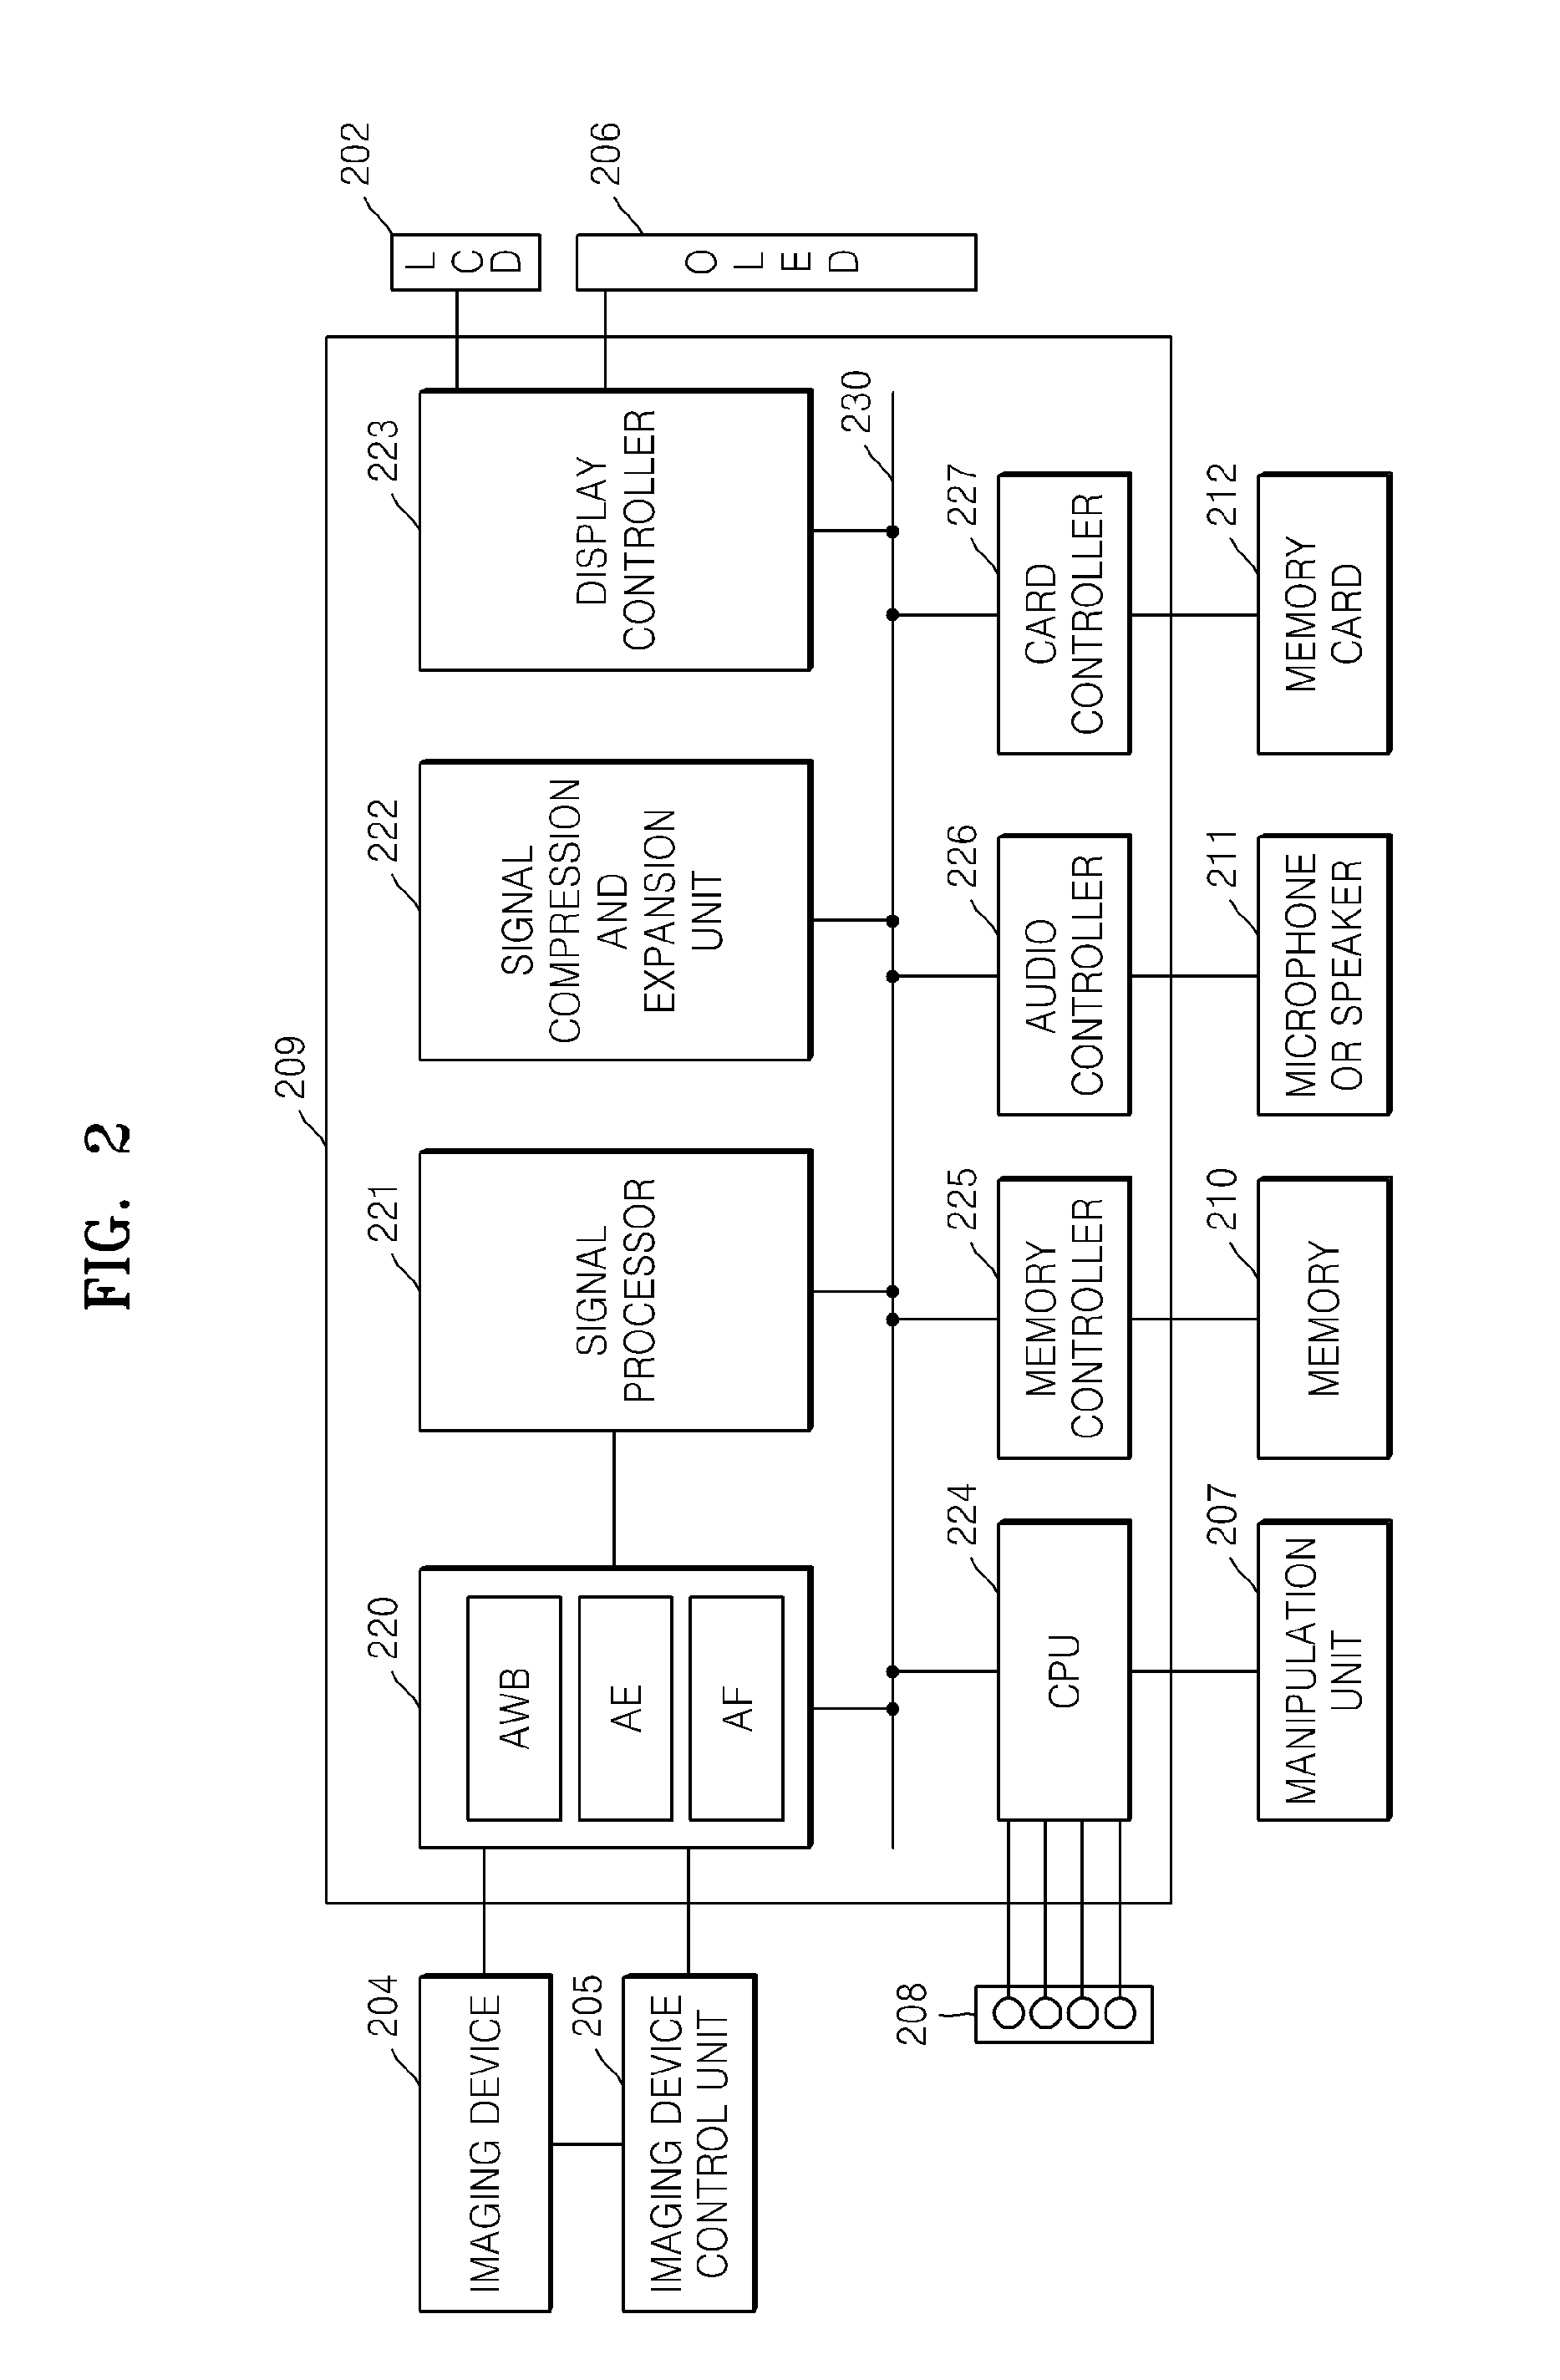 Method and apparatus for applying multi-autofocusing (AF) using contrast AF